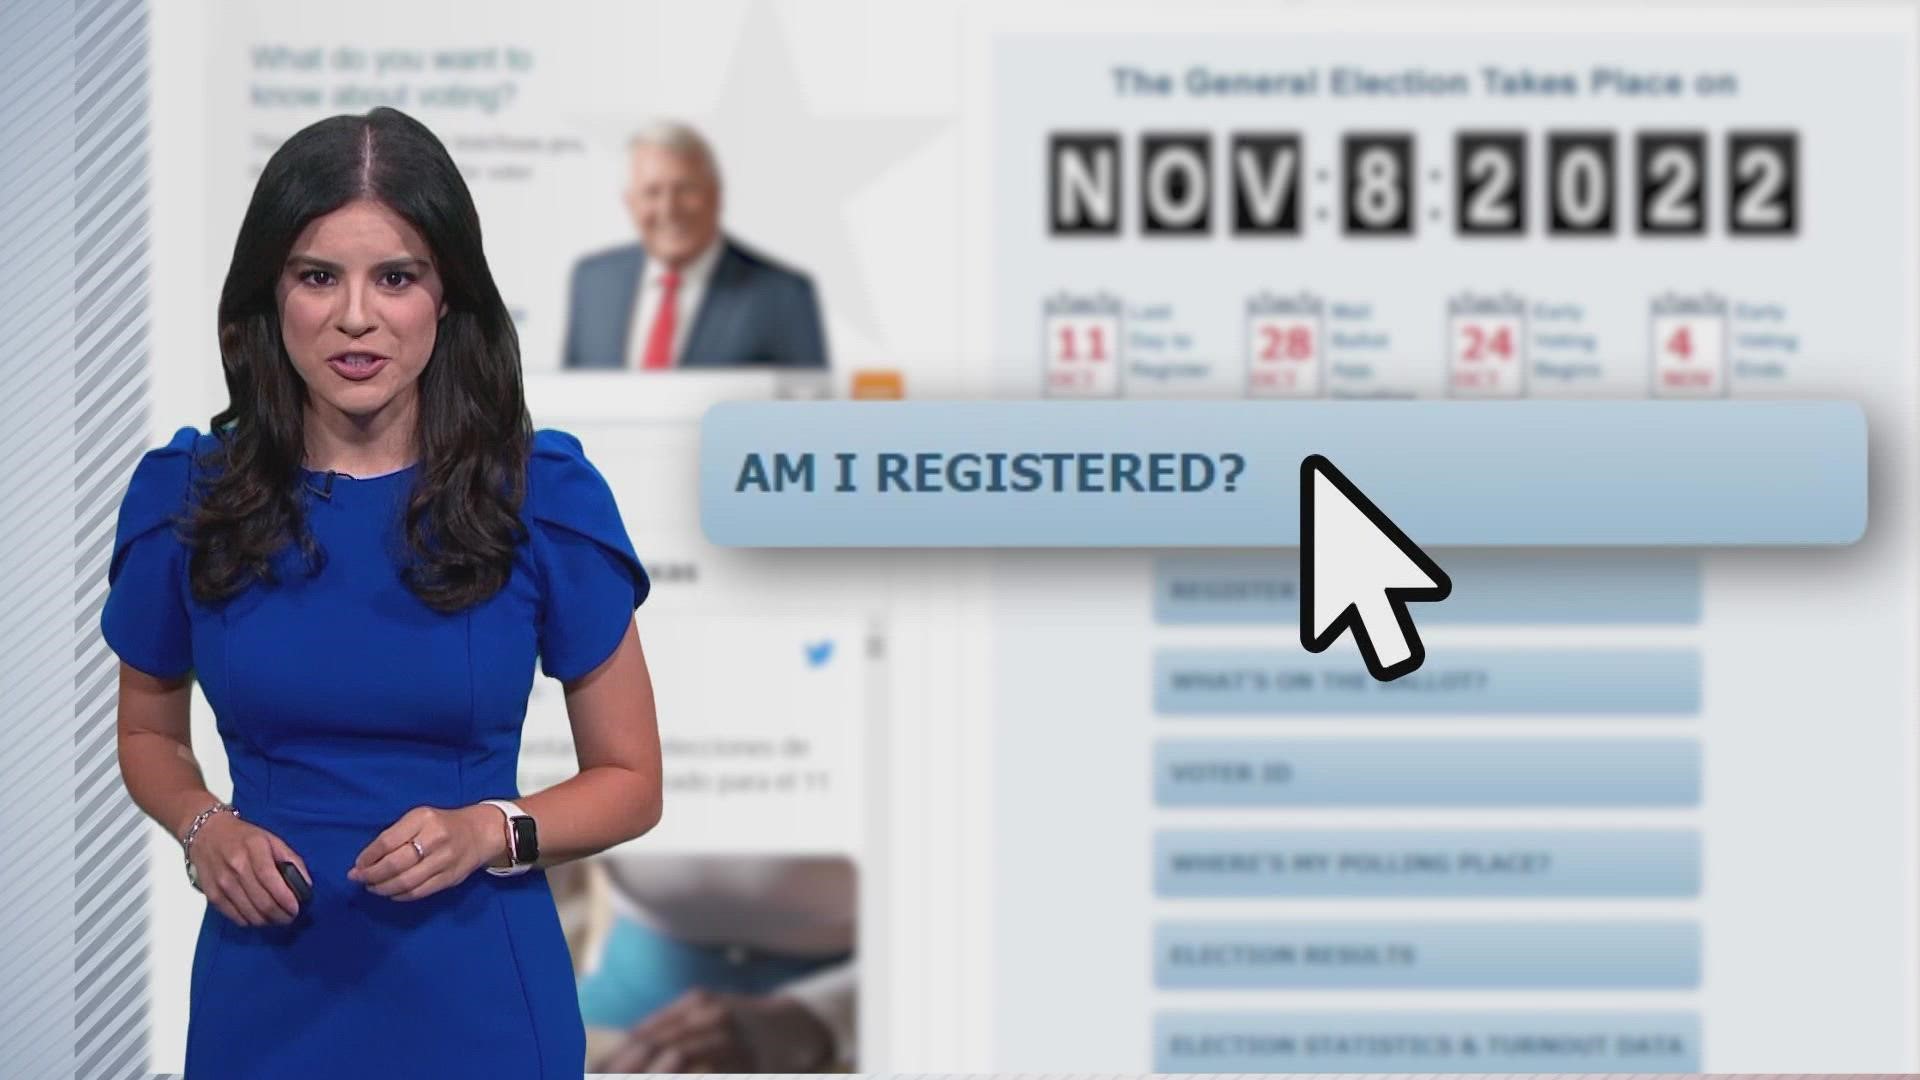 WFAA's Adriana De Alba shows how to check your voter registration status ahead of the general election.